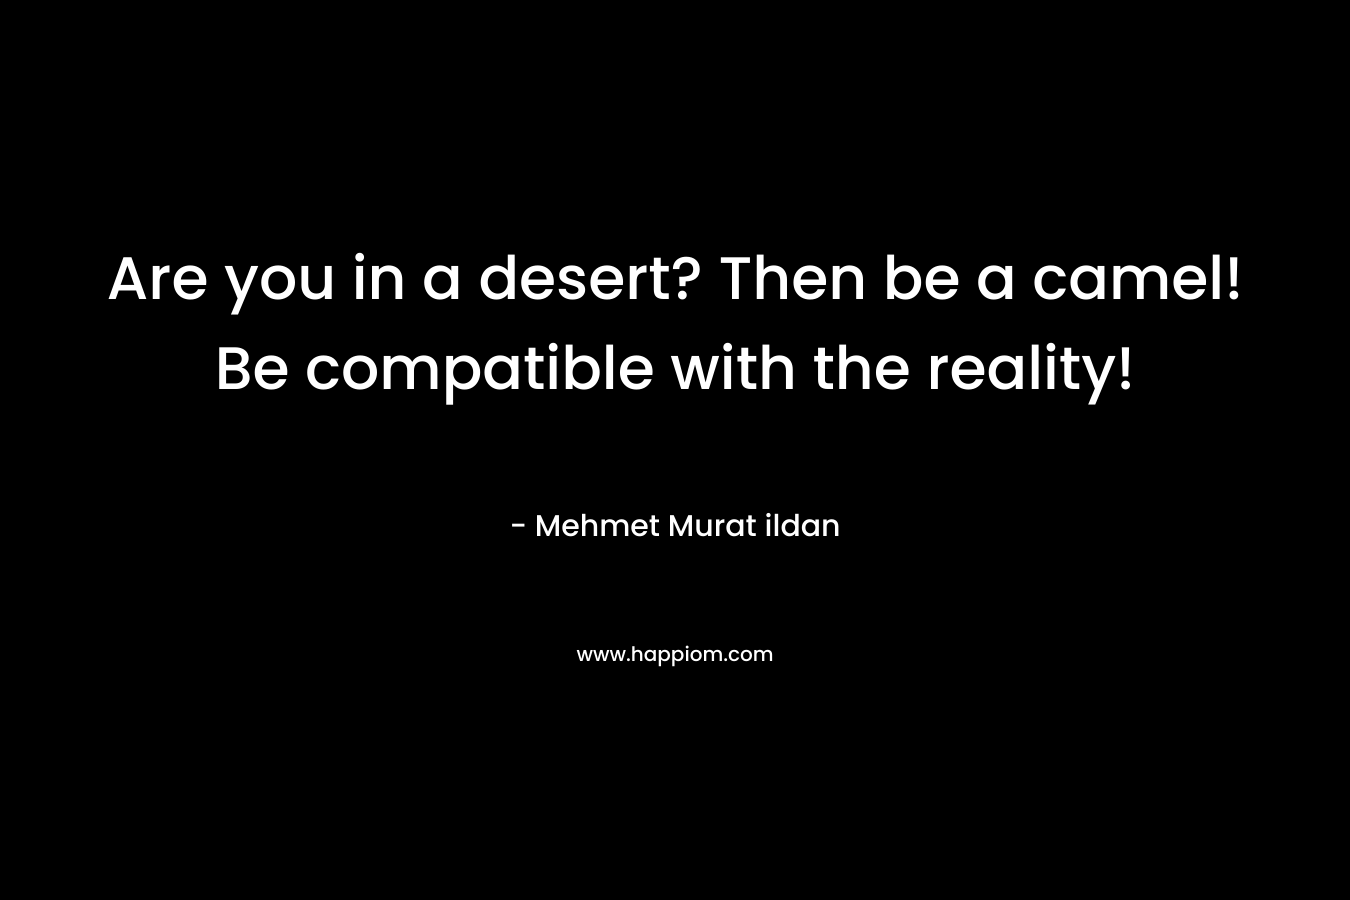 Are you in a desert? Then be a camel! Be compatible with the reality!